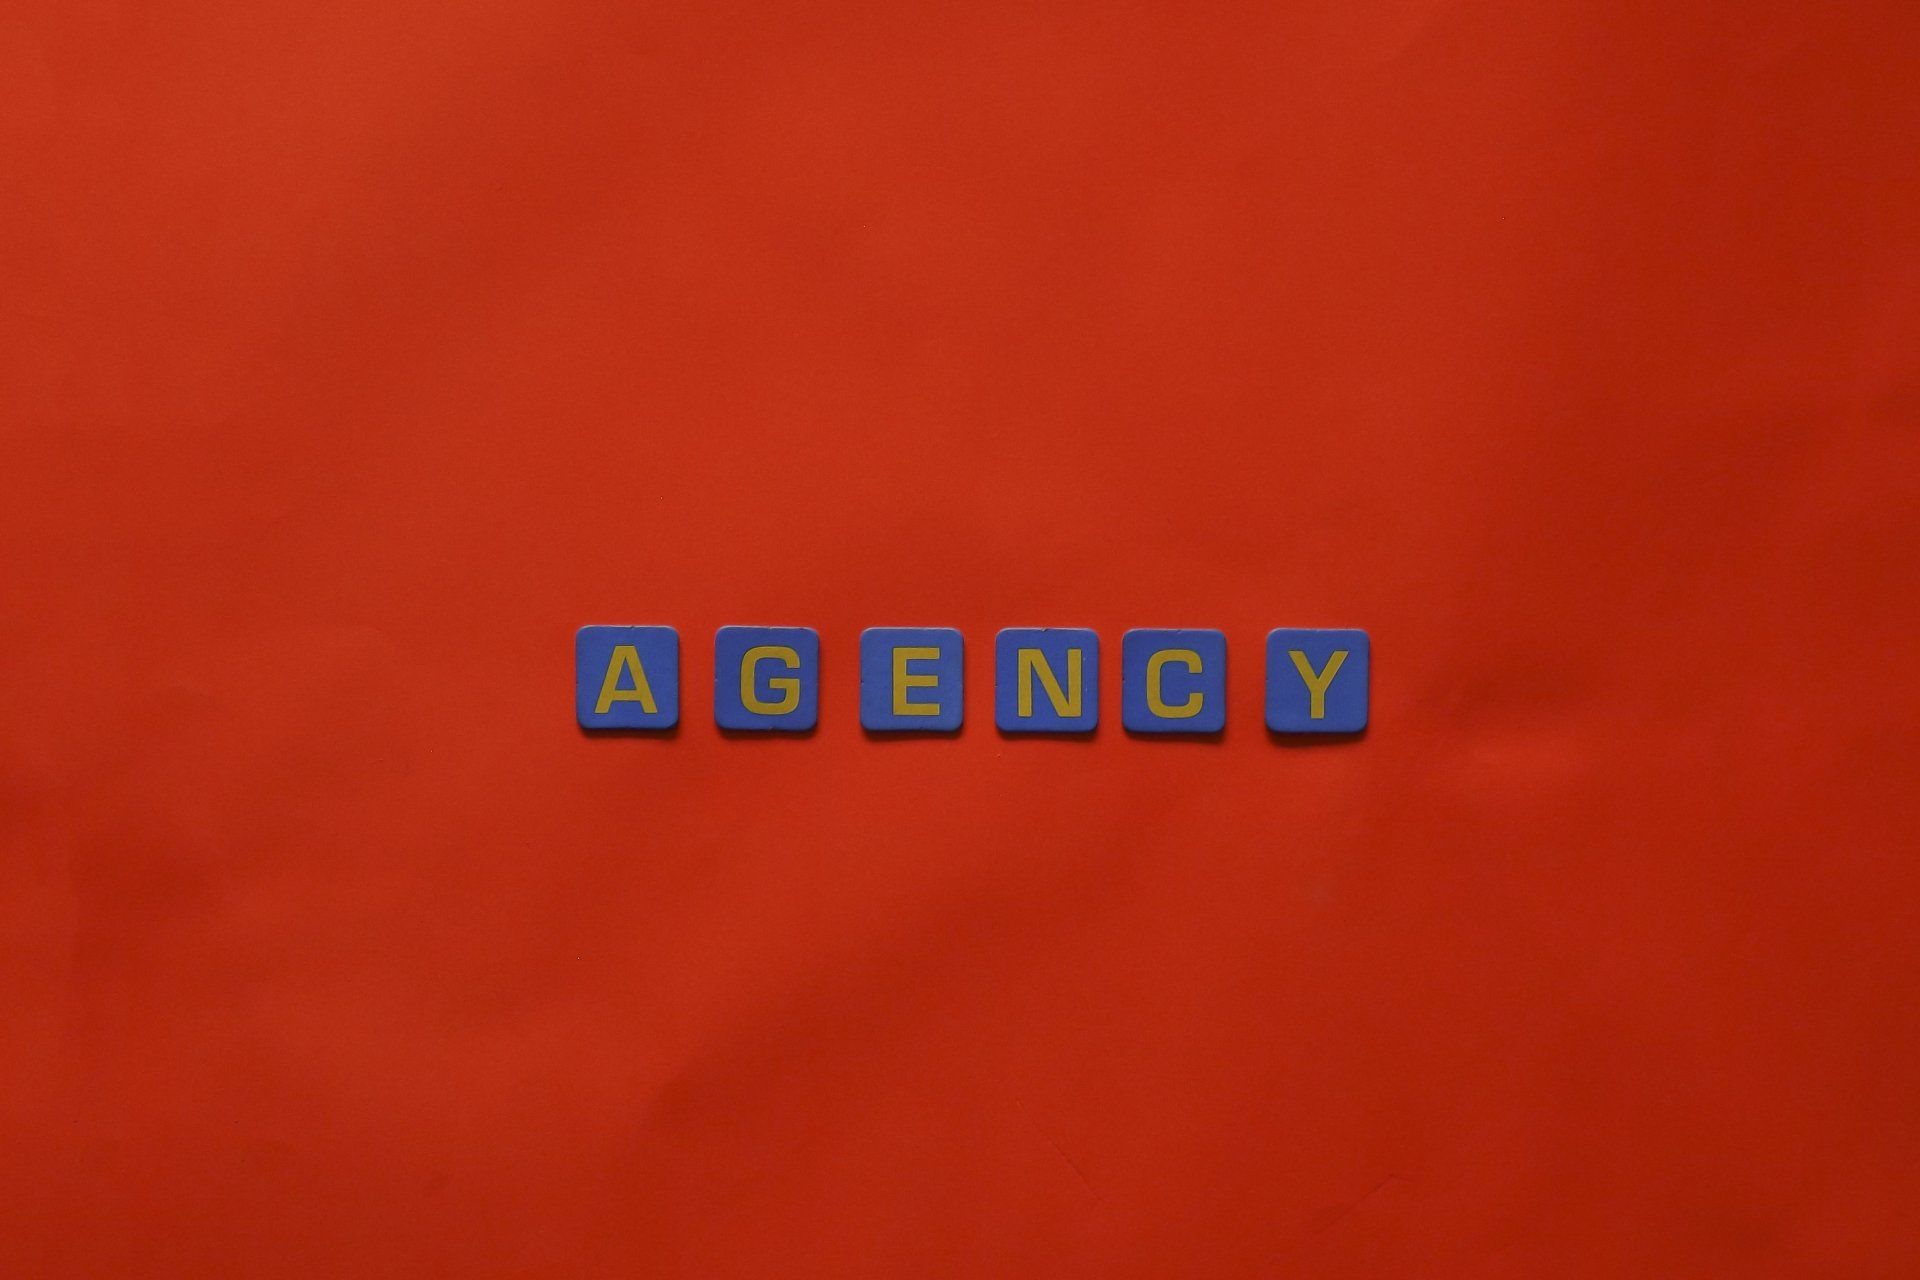 Agency Workers, Determining an Employer and Redundancy Payments